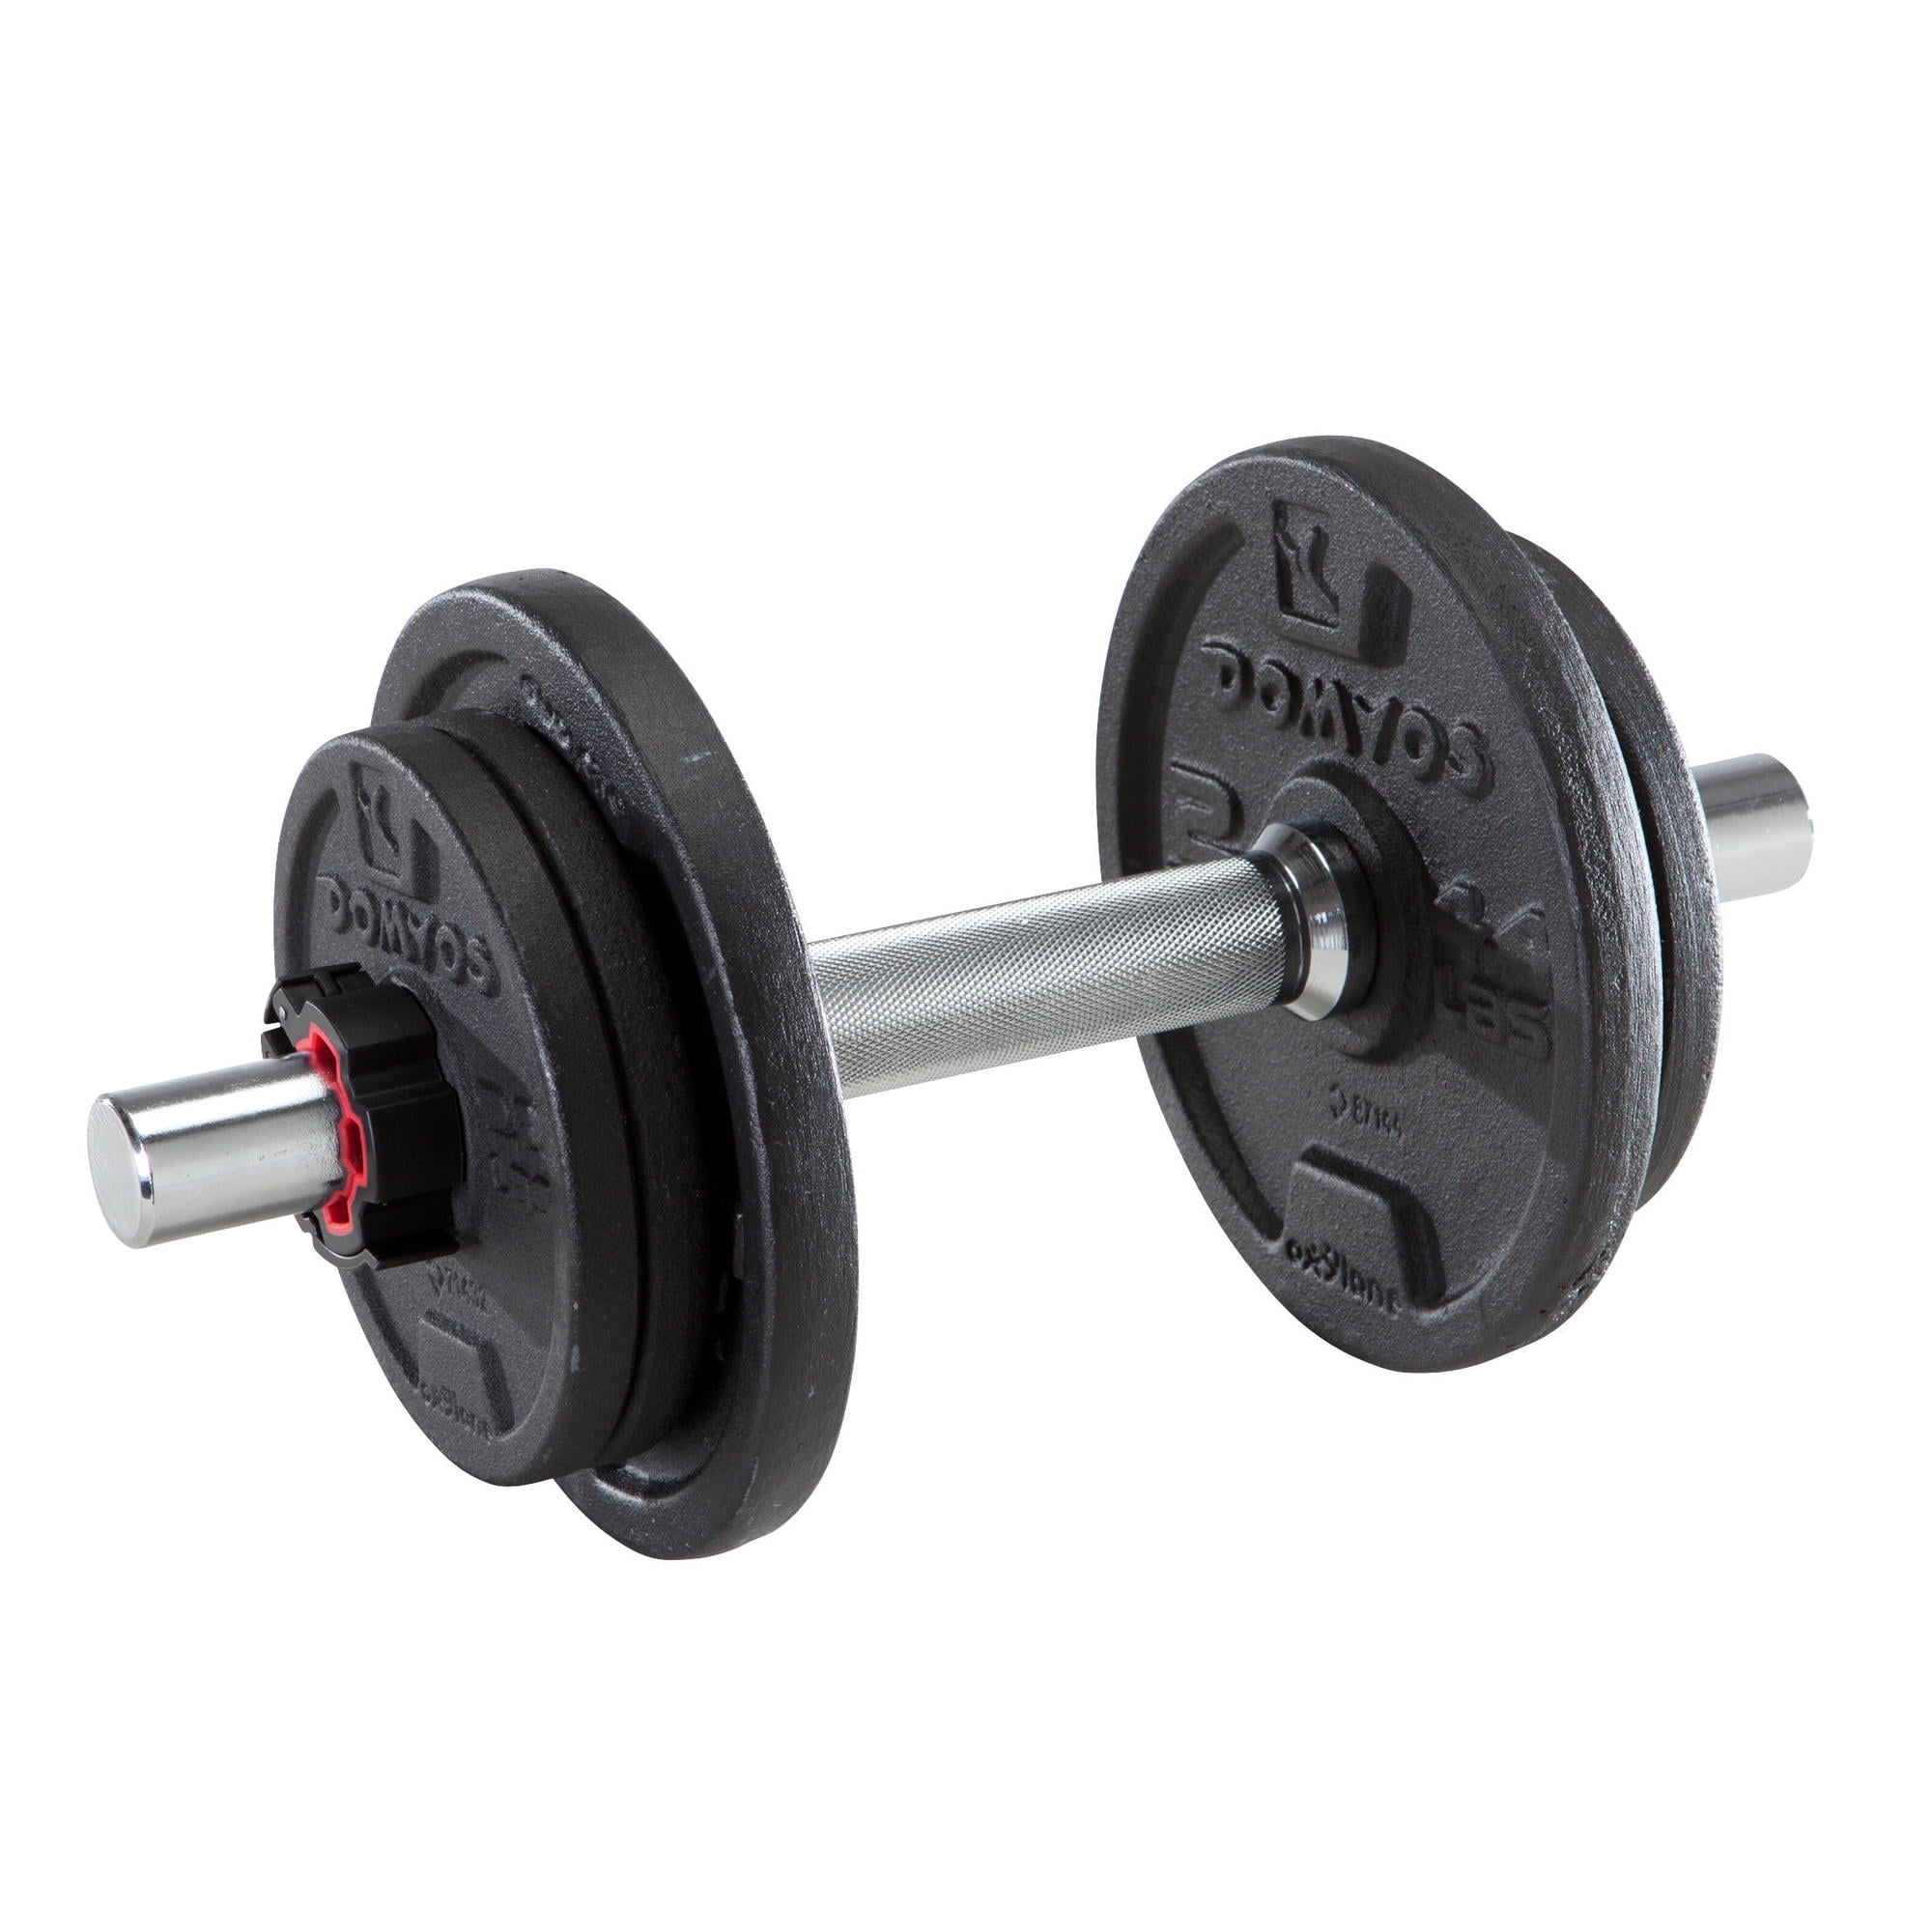 Details about   Vinyl Dumbbell Set All Purpose Weight Training Exercise Workout Equipment 40 Lbs 